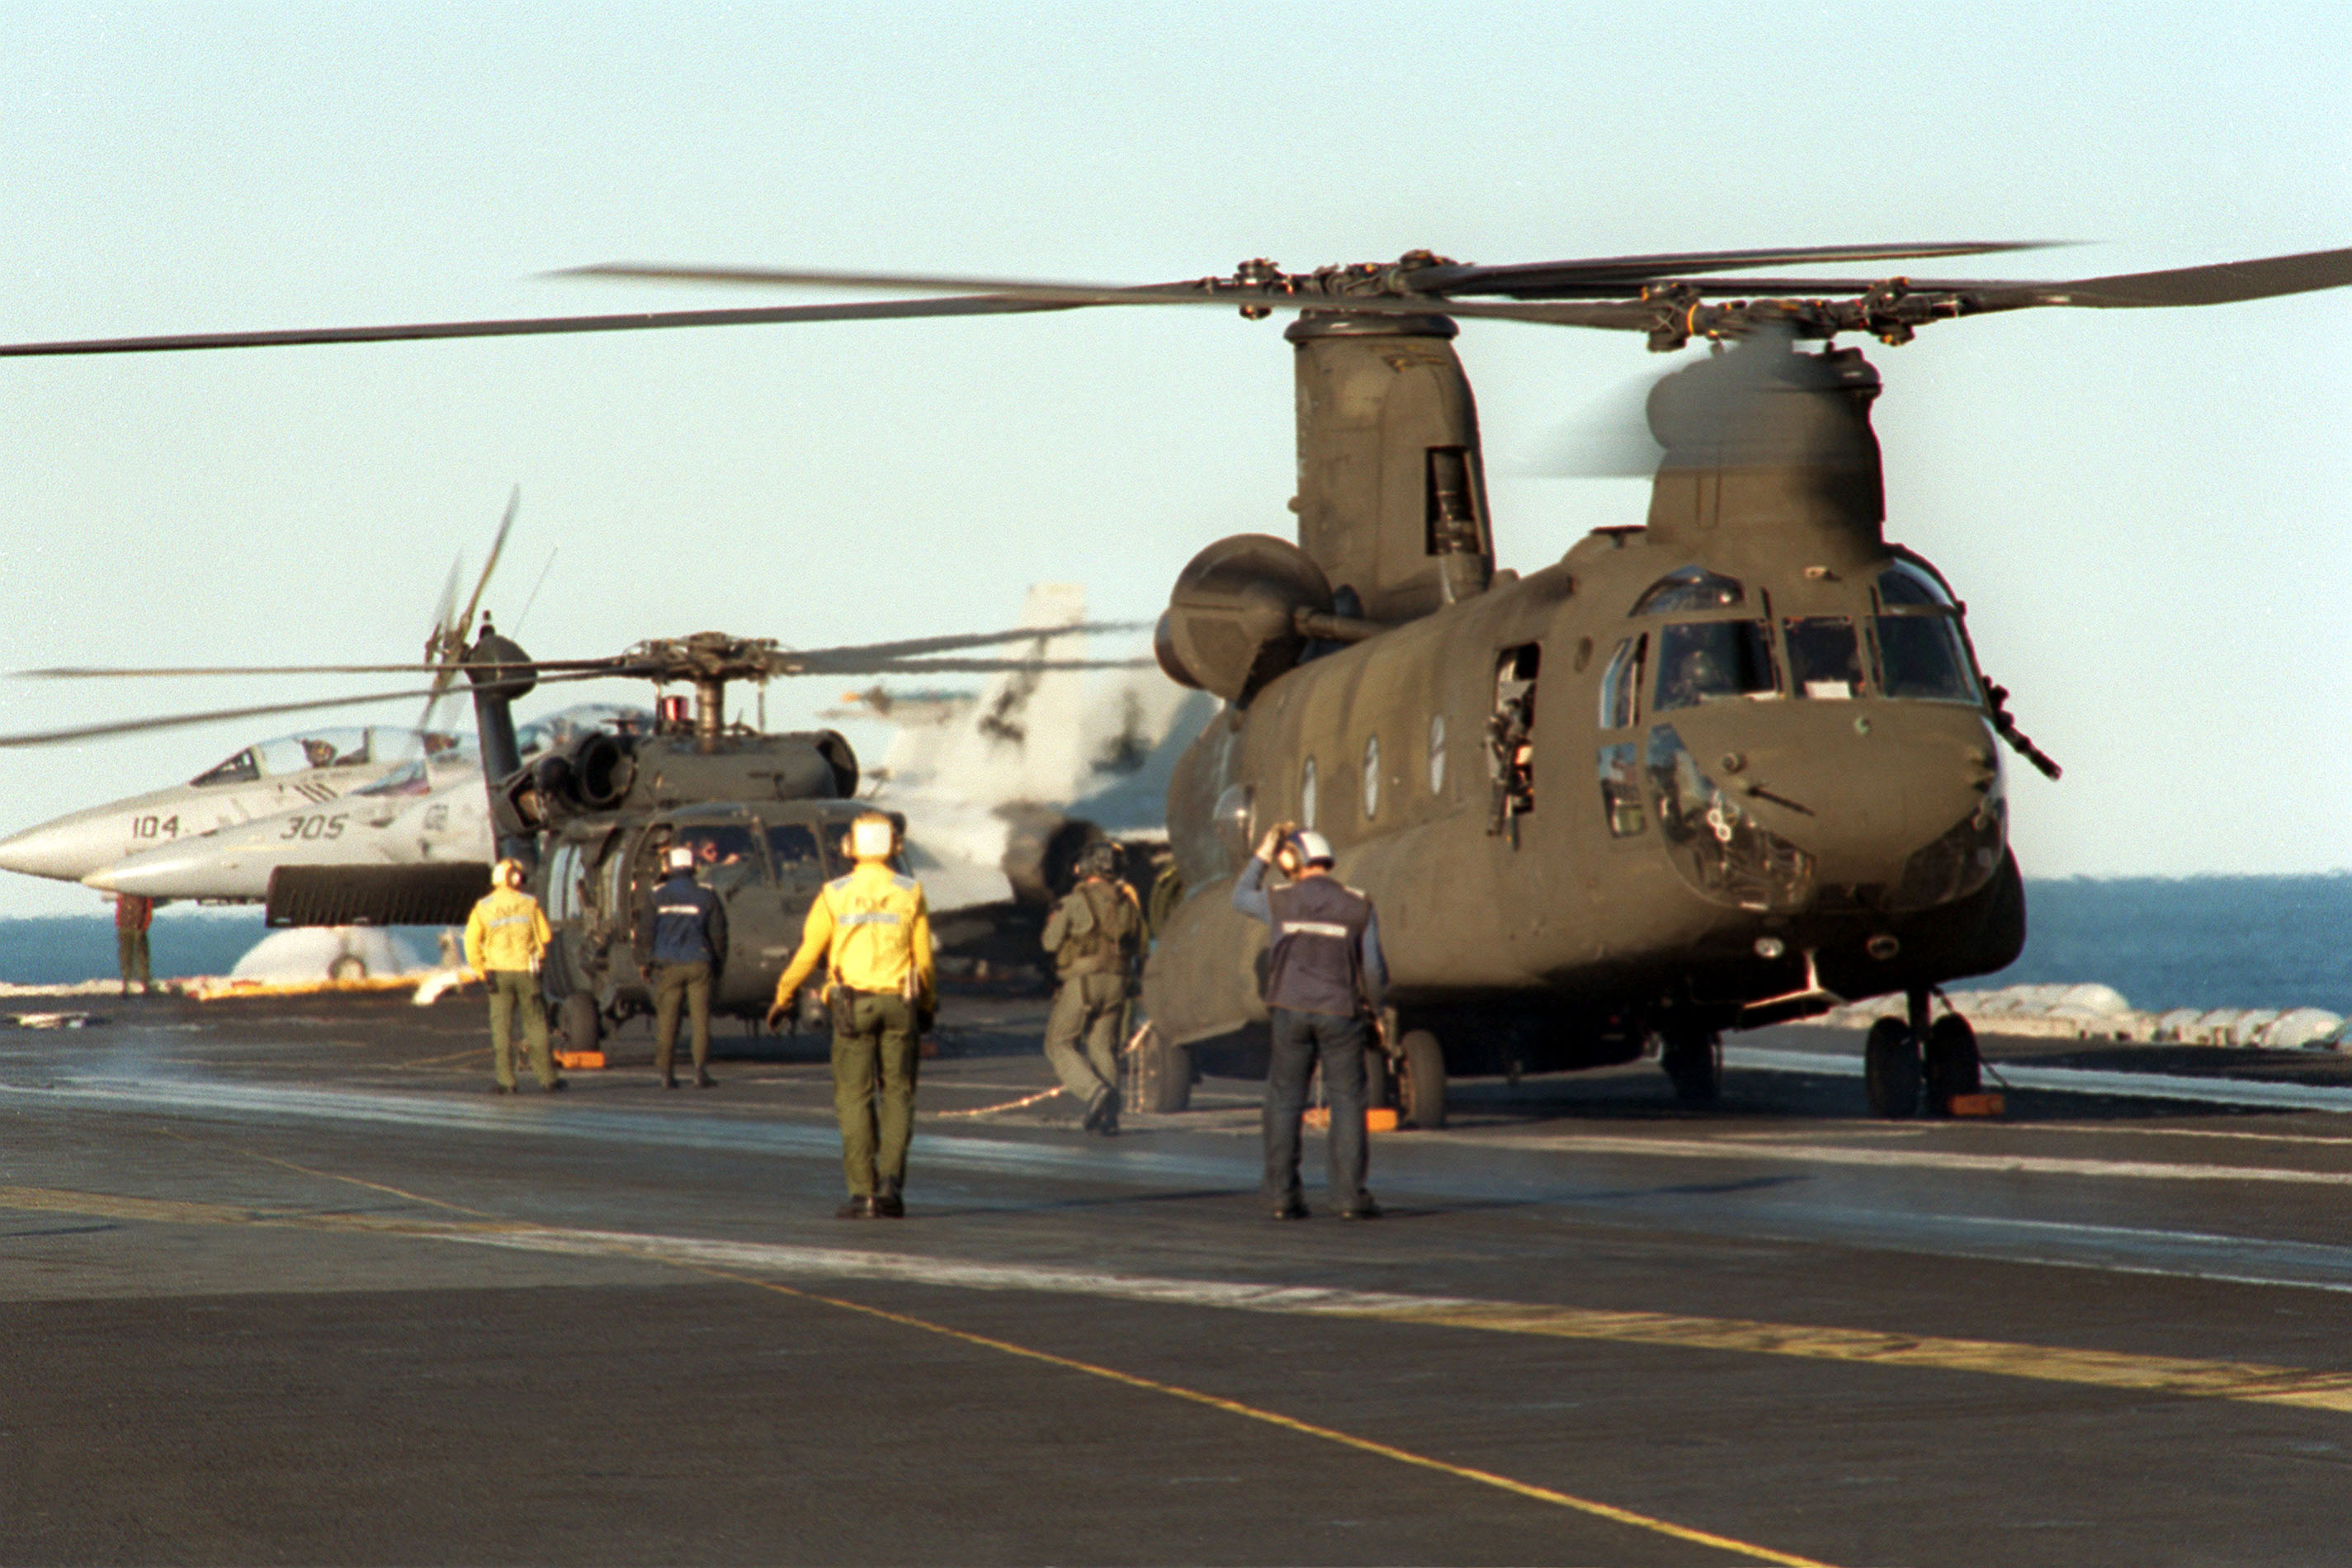 160th SOAR - MH-47D Chinook - Aircraft Carrier - Special Ops Photos